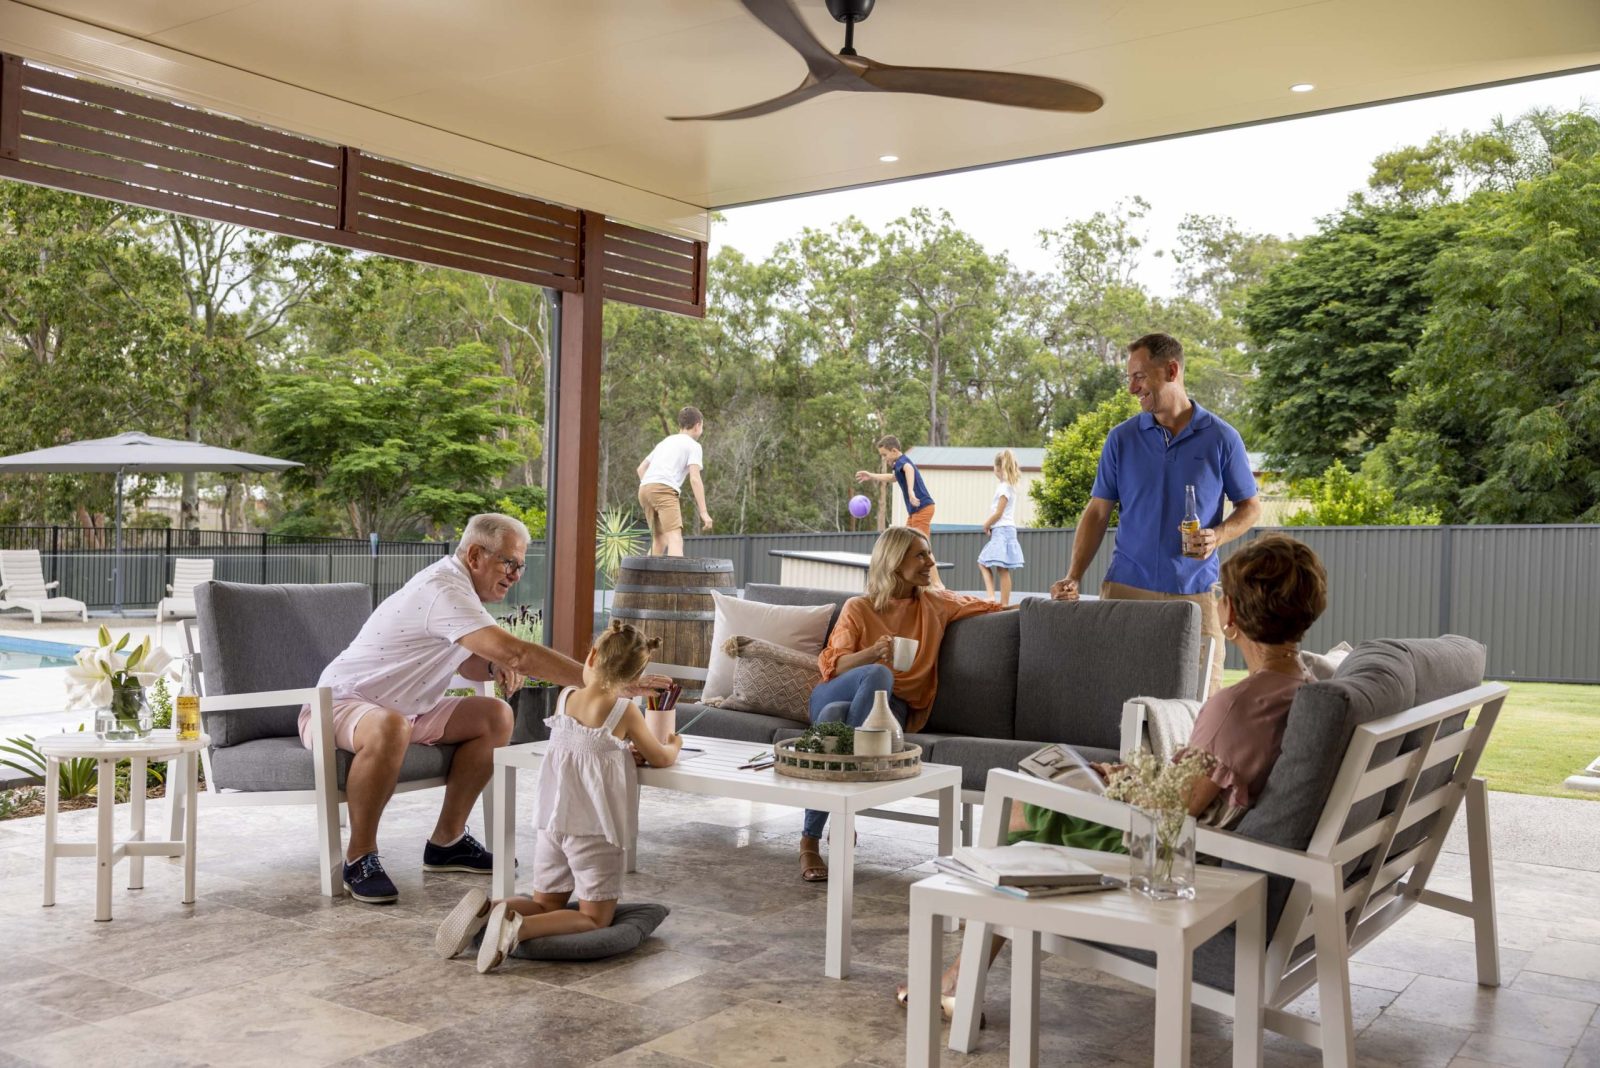 Family on an outdoor patio